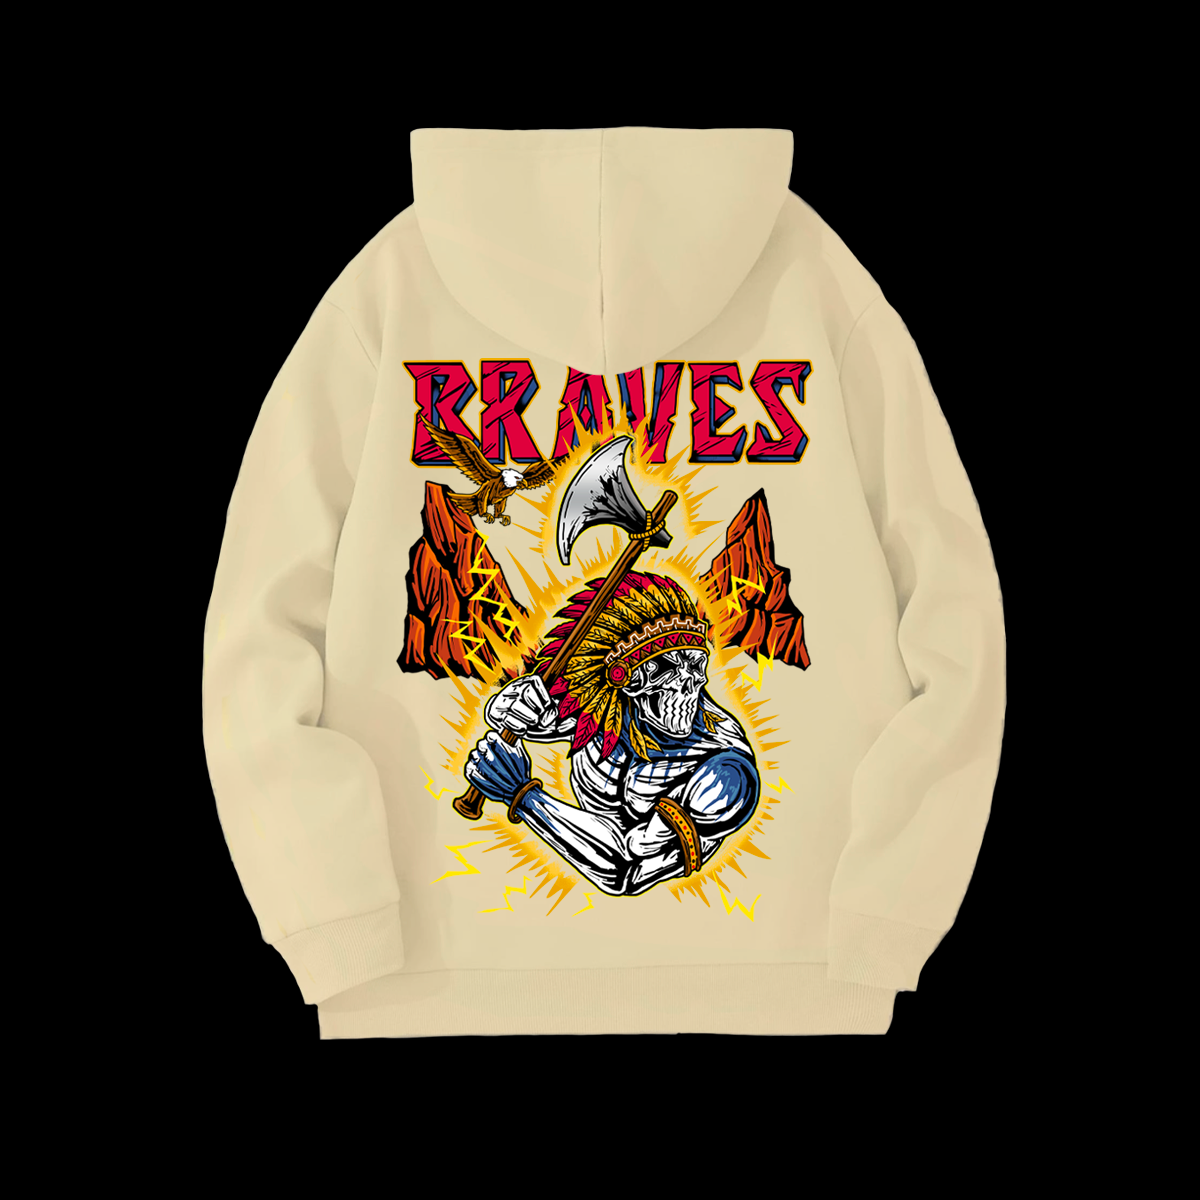 INCARNAPE BRAVES "FOR THE A" PULL-OVER HOODIE